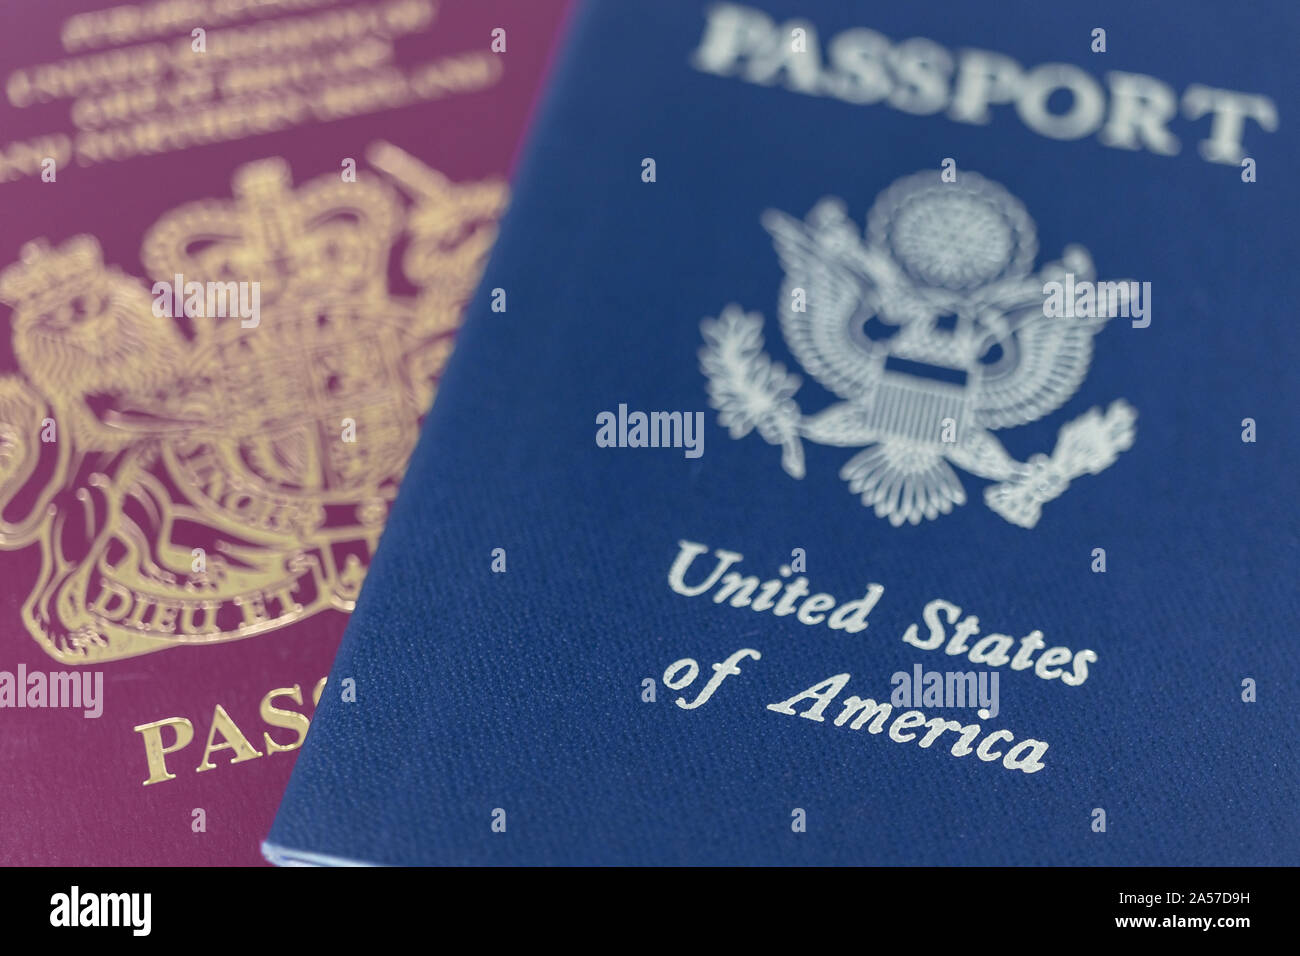 London / UK - October 9th 2019 - UK and US passports, extreme closeup macro with a shallow depth of field Stock Photo